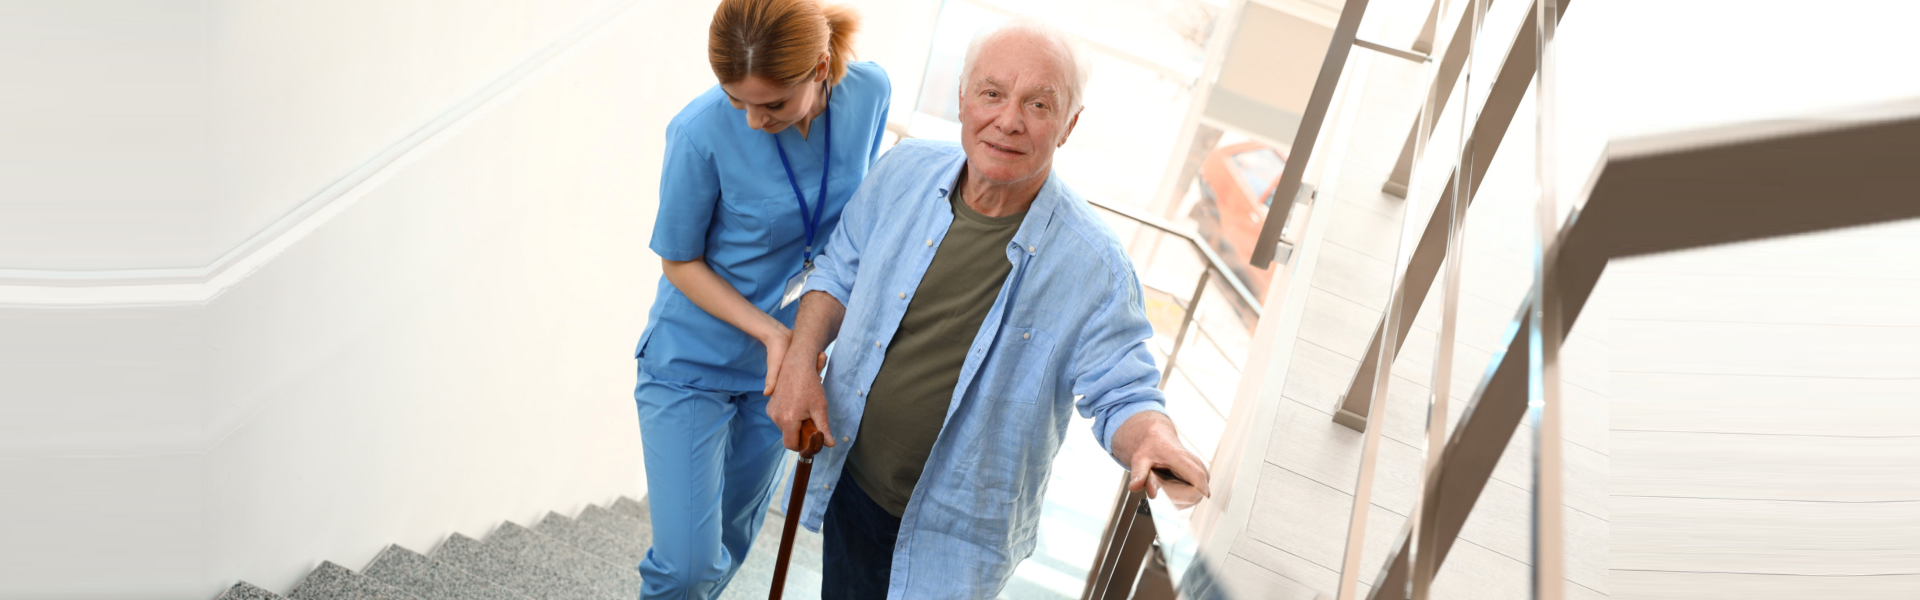 elderly going up the stairs while caregiver is supporting him